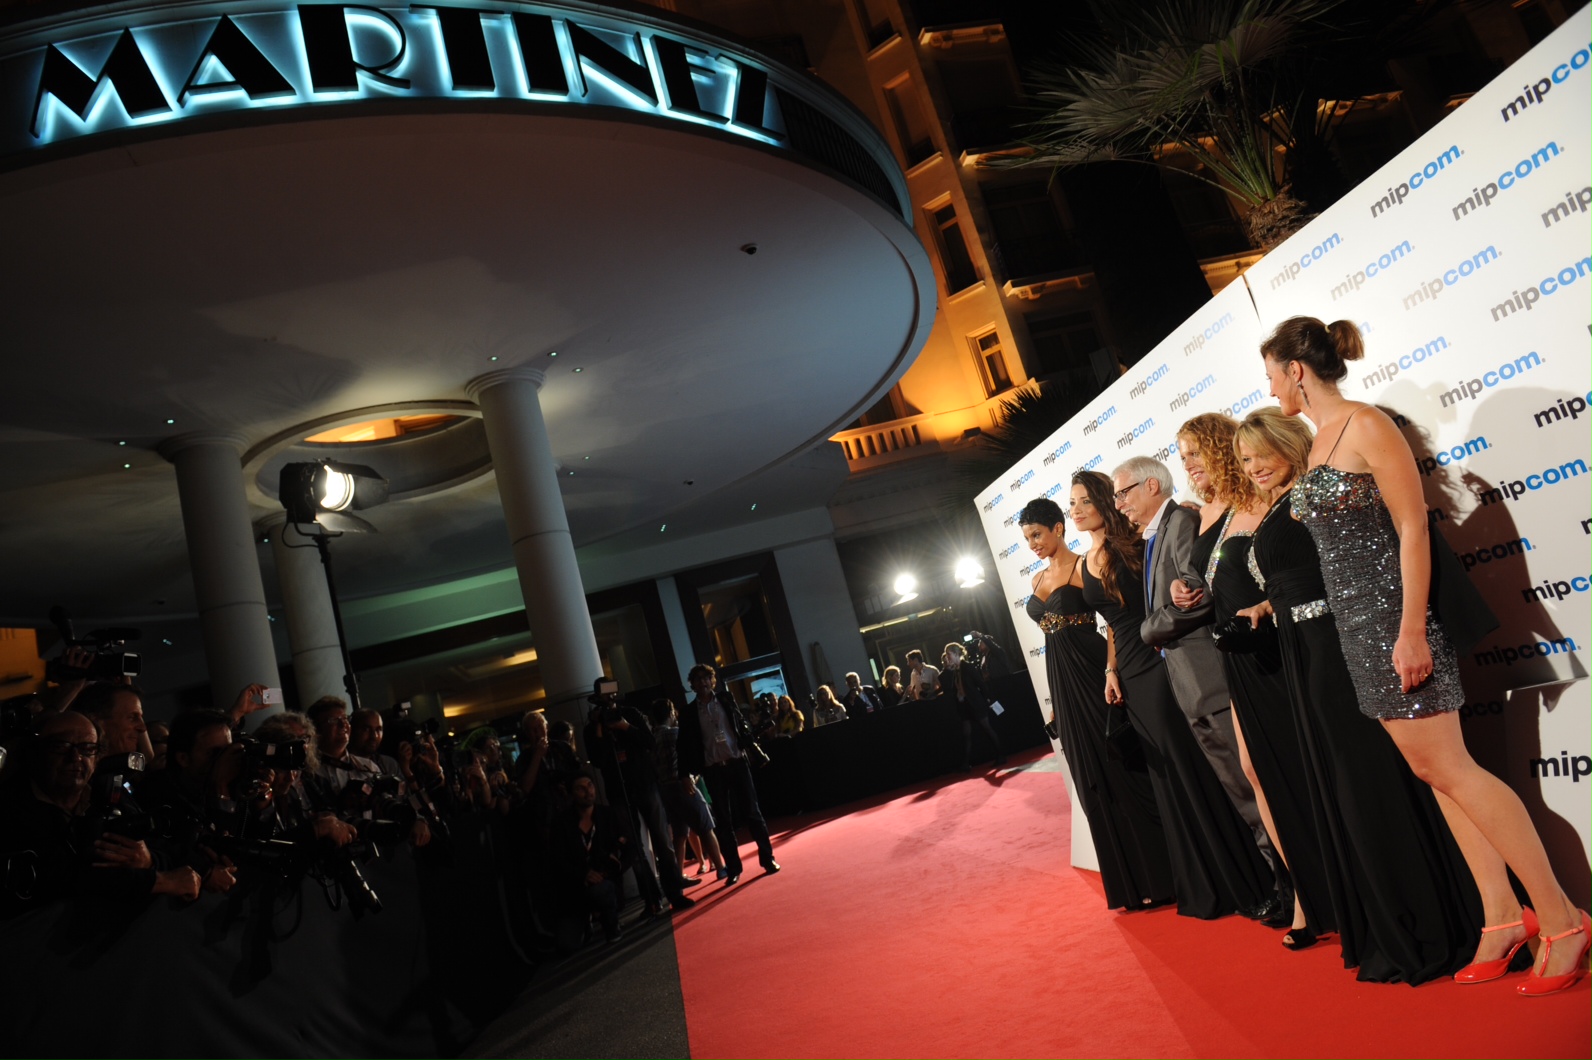 RED CARPET PREMIERE FOR HOT WOMEN TV SERIES, CANNES, FRANCE. October 2012